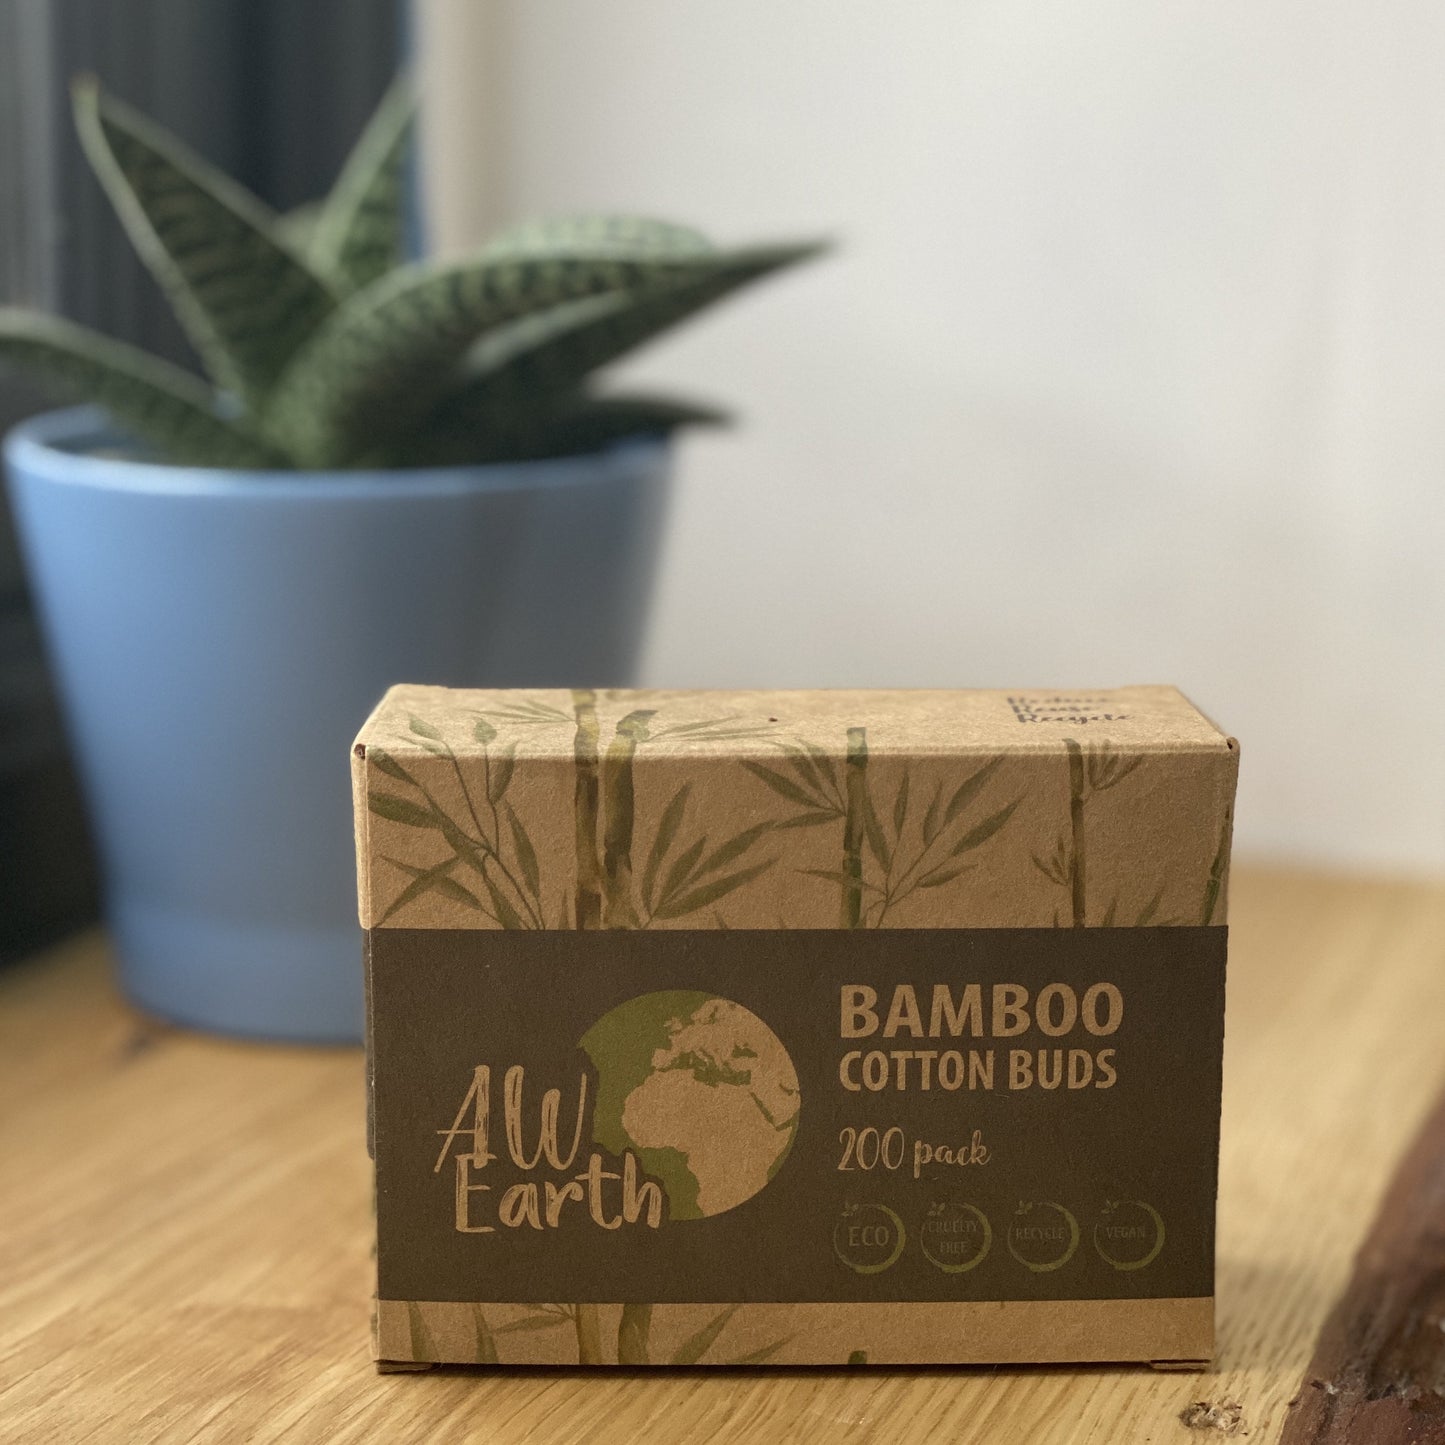 bamboo cotton buds, sustainable cotton buds, cotton buds, biodegradable cotton buds, suneeta cotton buds, suneeta, beauty essential bathroom essential, zero waste cotton buds, ear buds, sustainable ear buds, eco friendly cotton buds, zero waste cotton buds, plastic free cotton buds, no waste